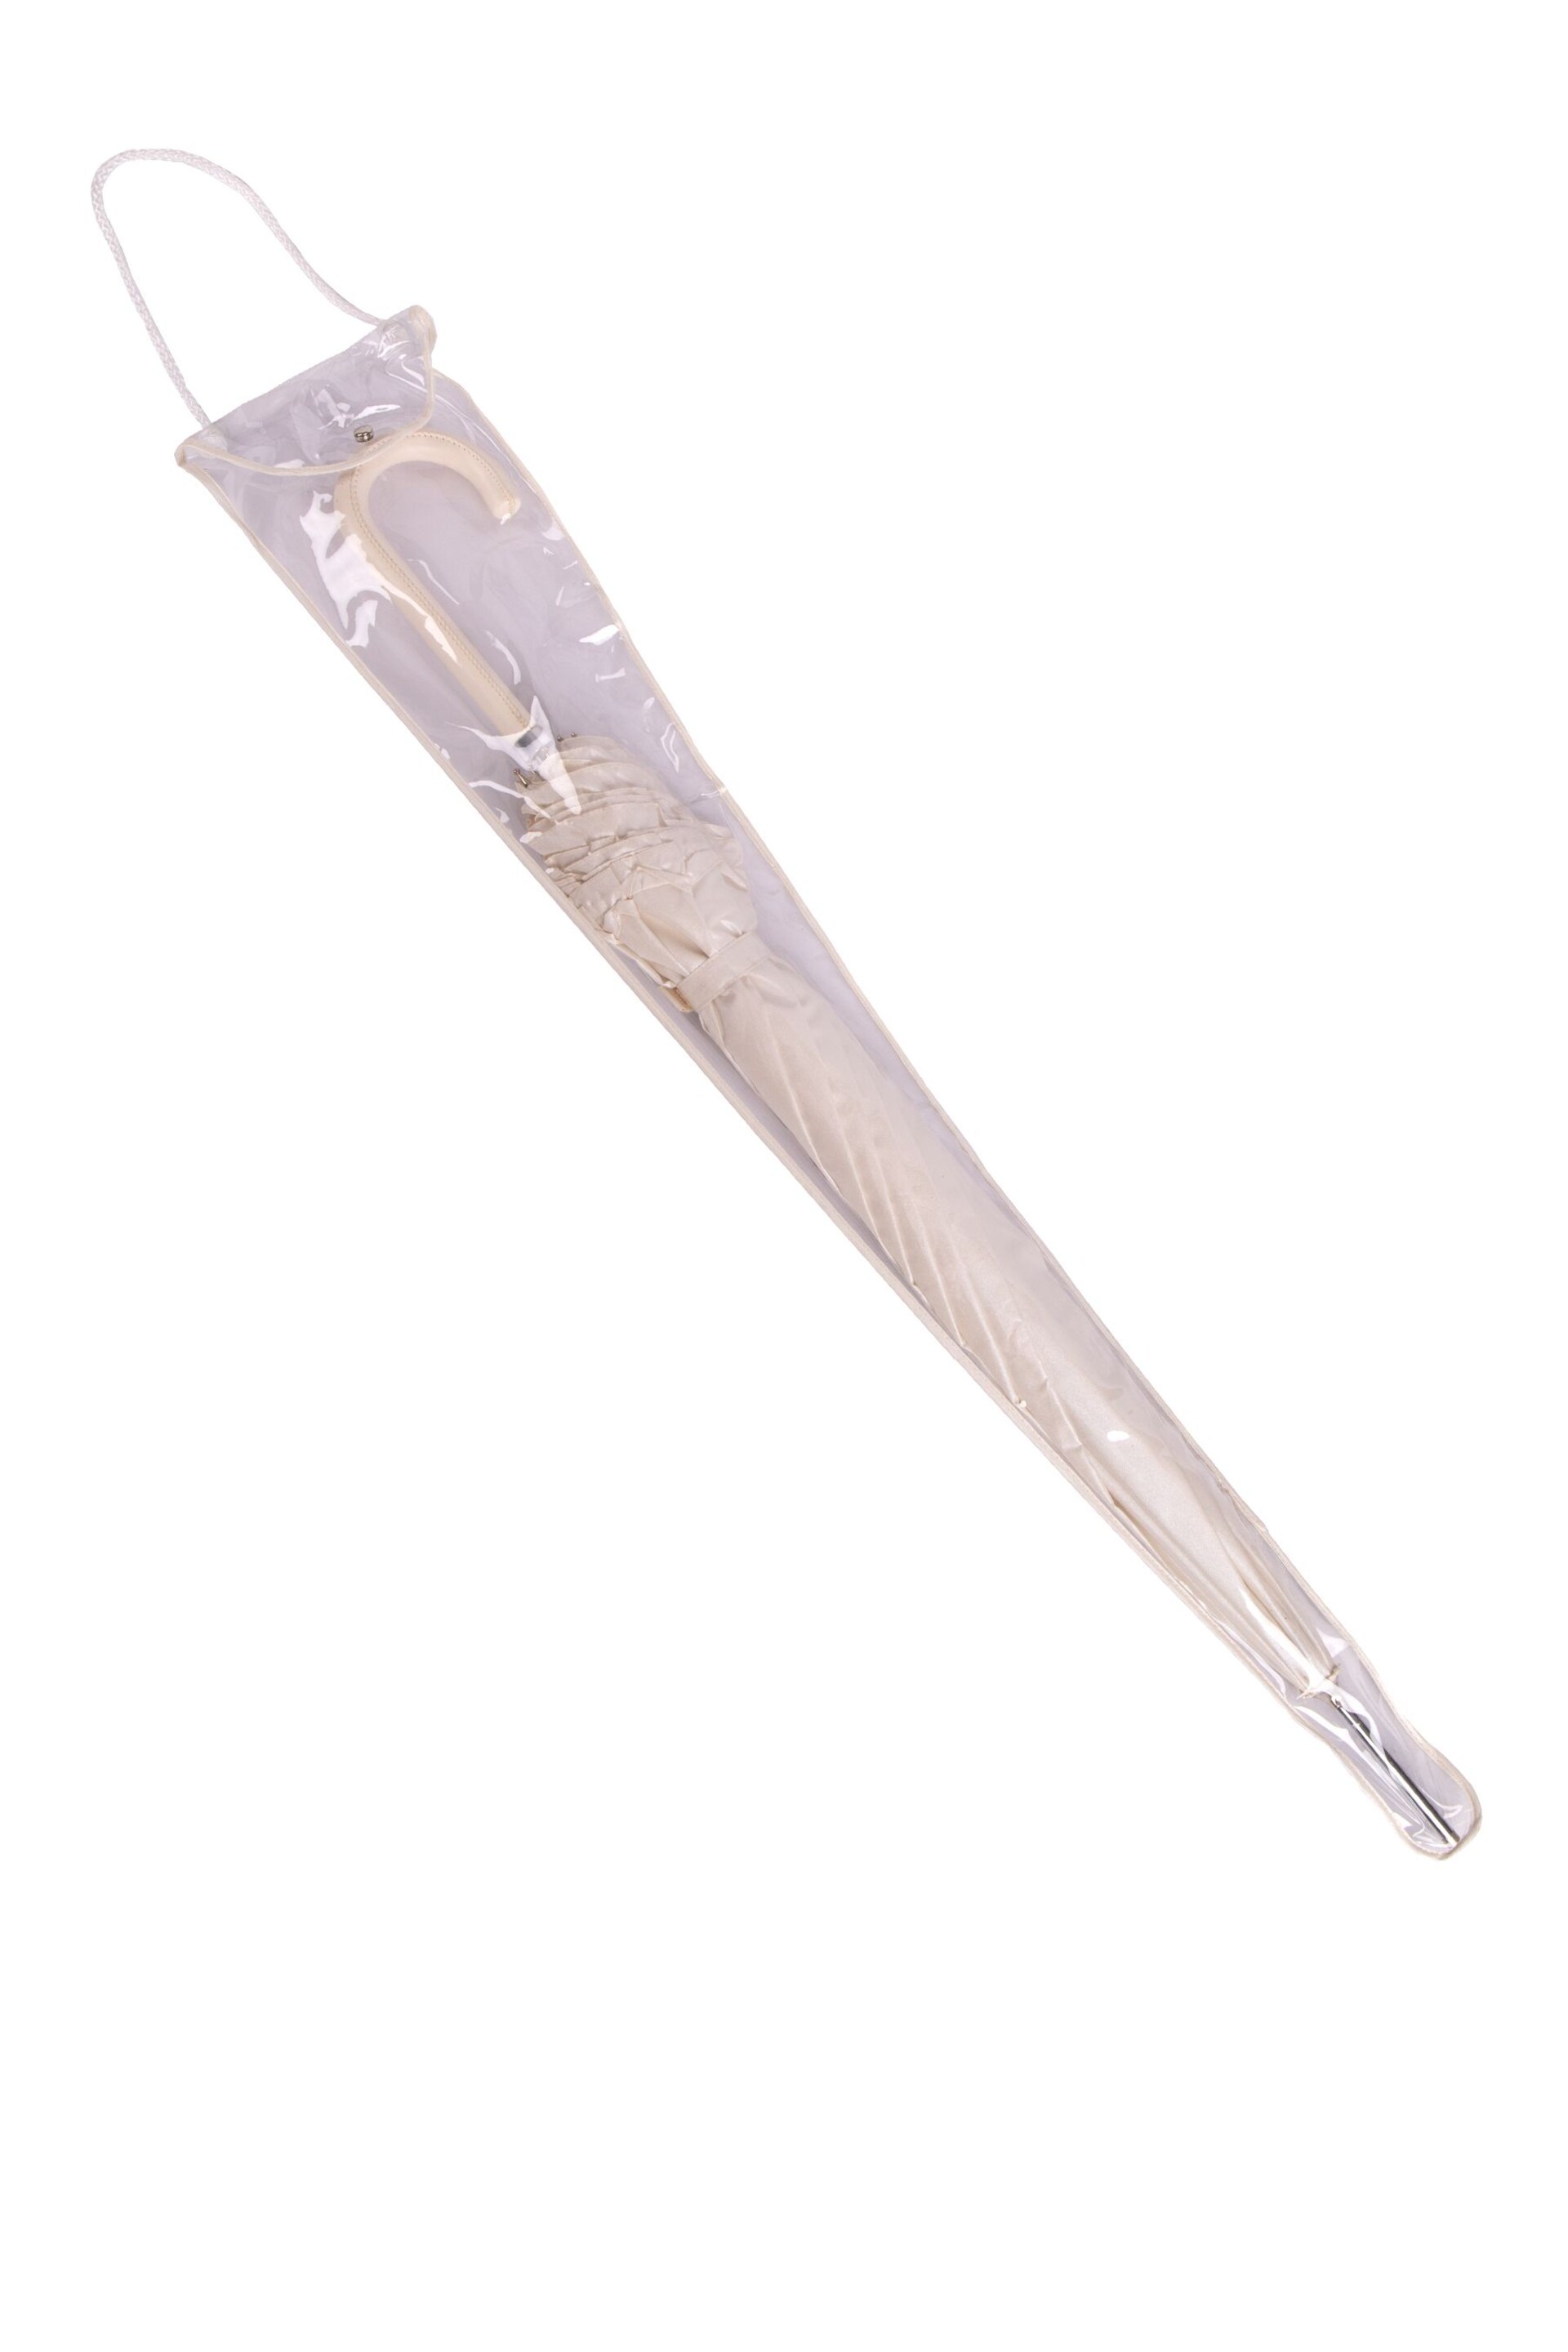 Totes White Pearlised Wedding Walker Umbrella With Frill - Image 4 of 4